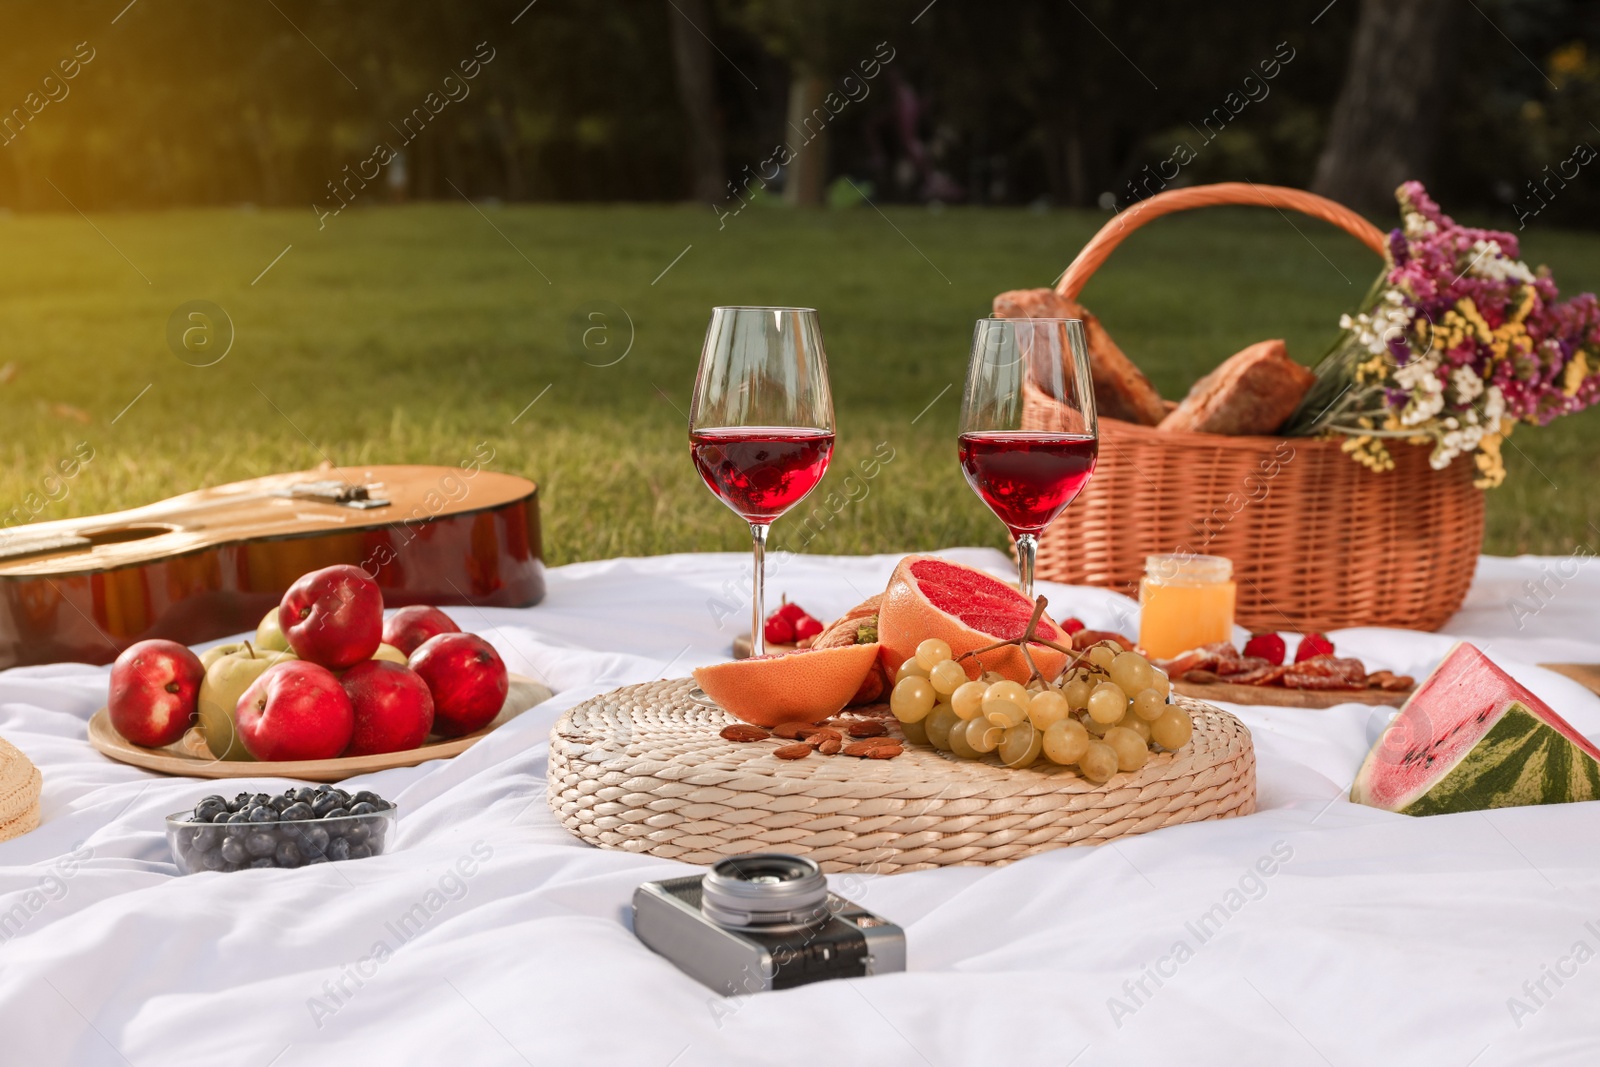 Photo of Delicious food and wine served for summer picnic on plaid in park